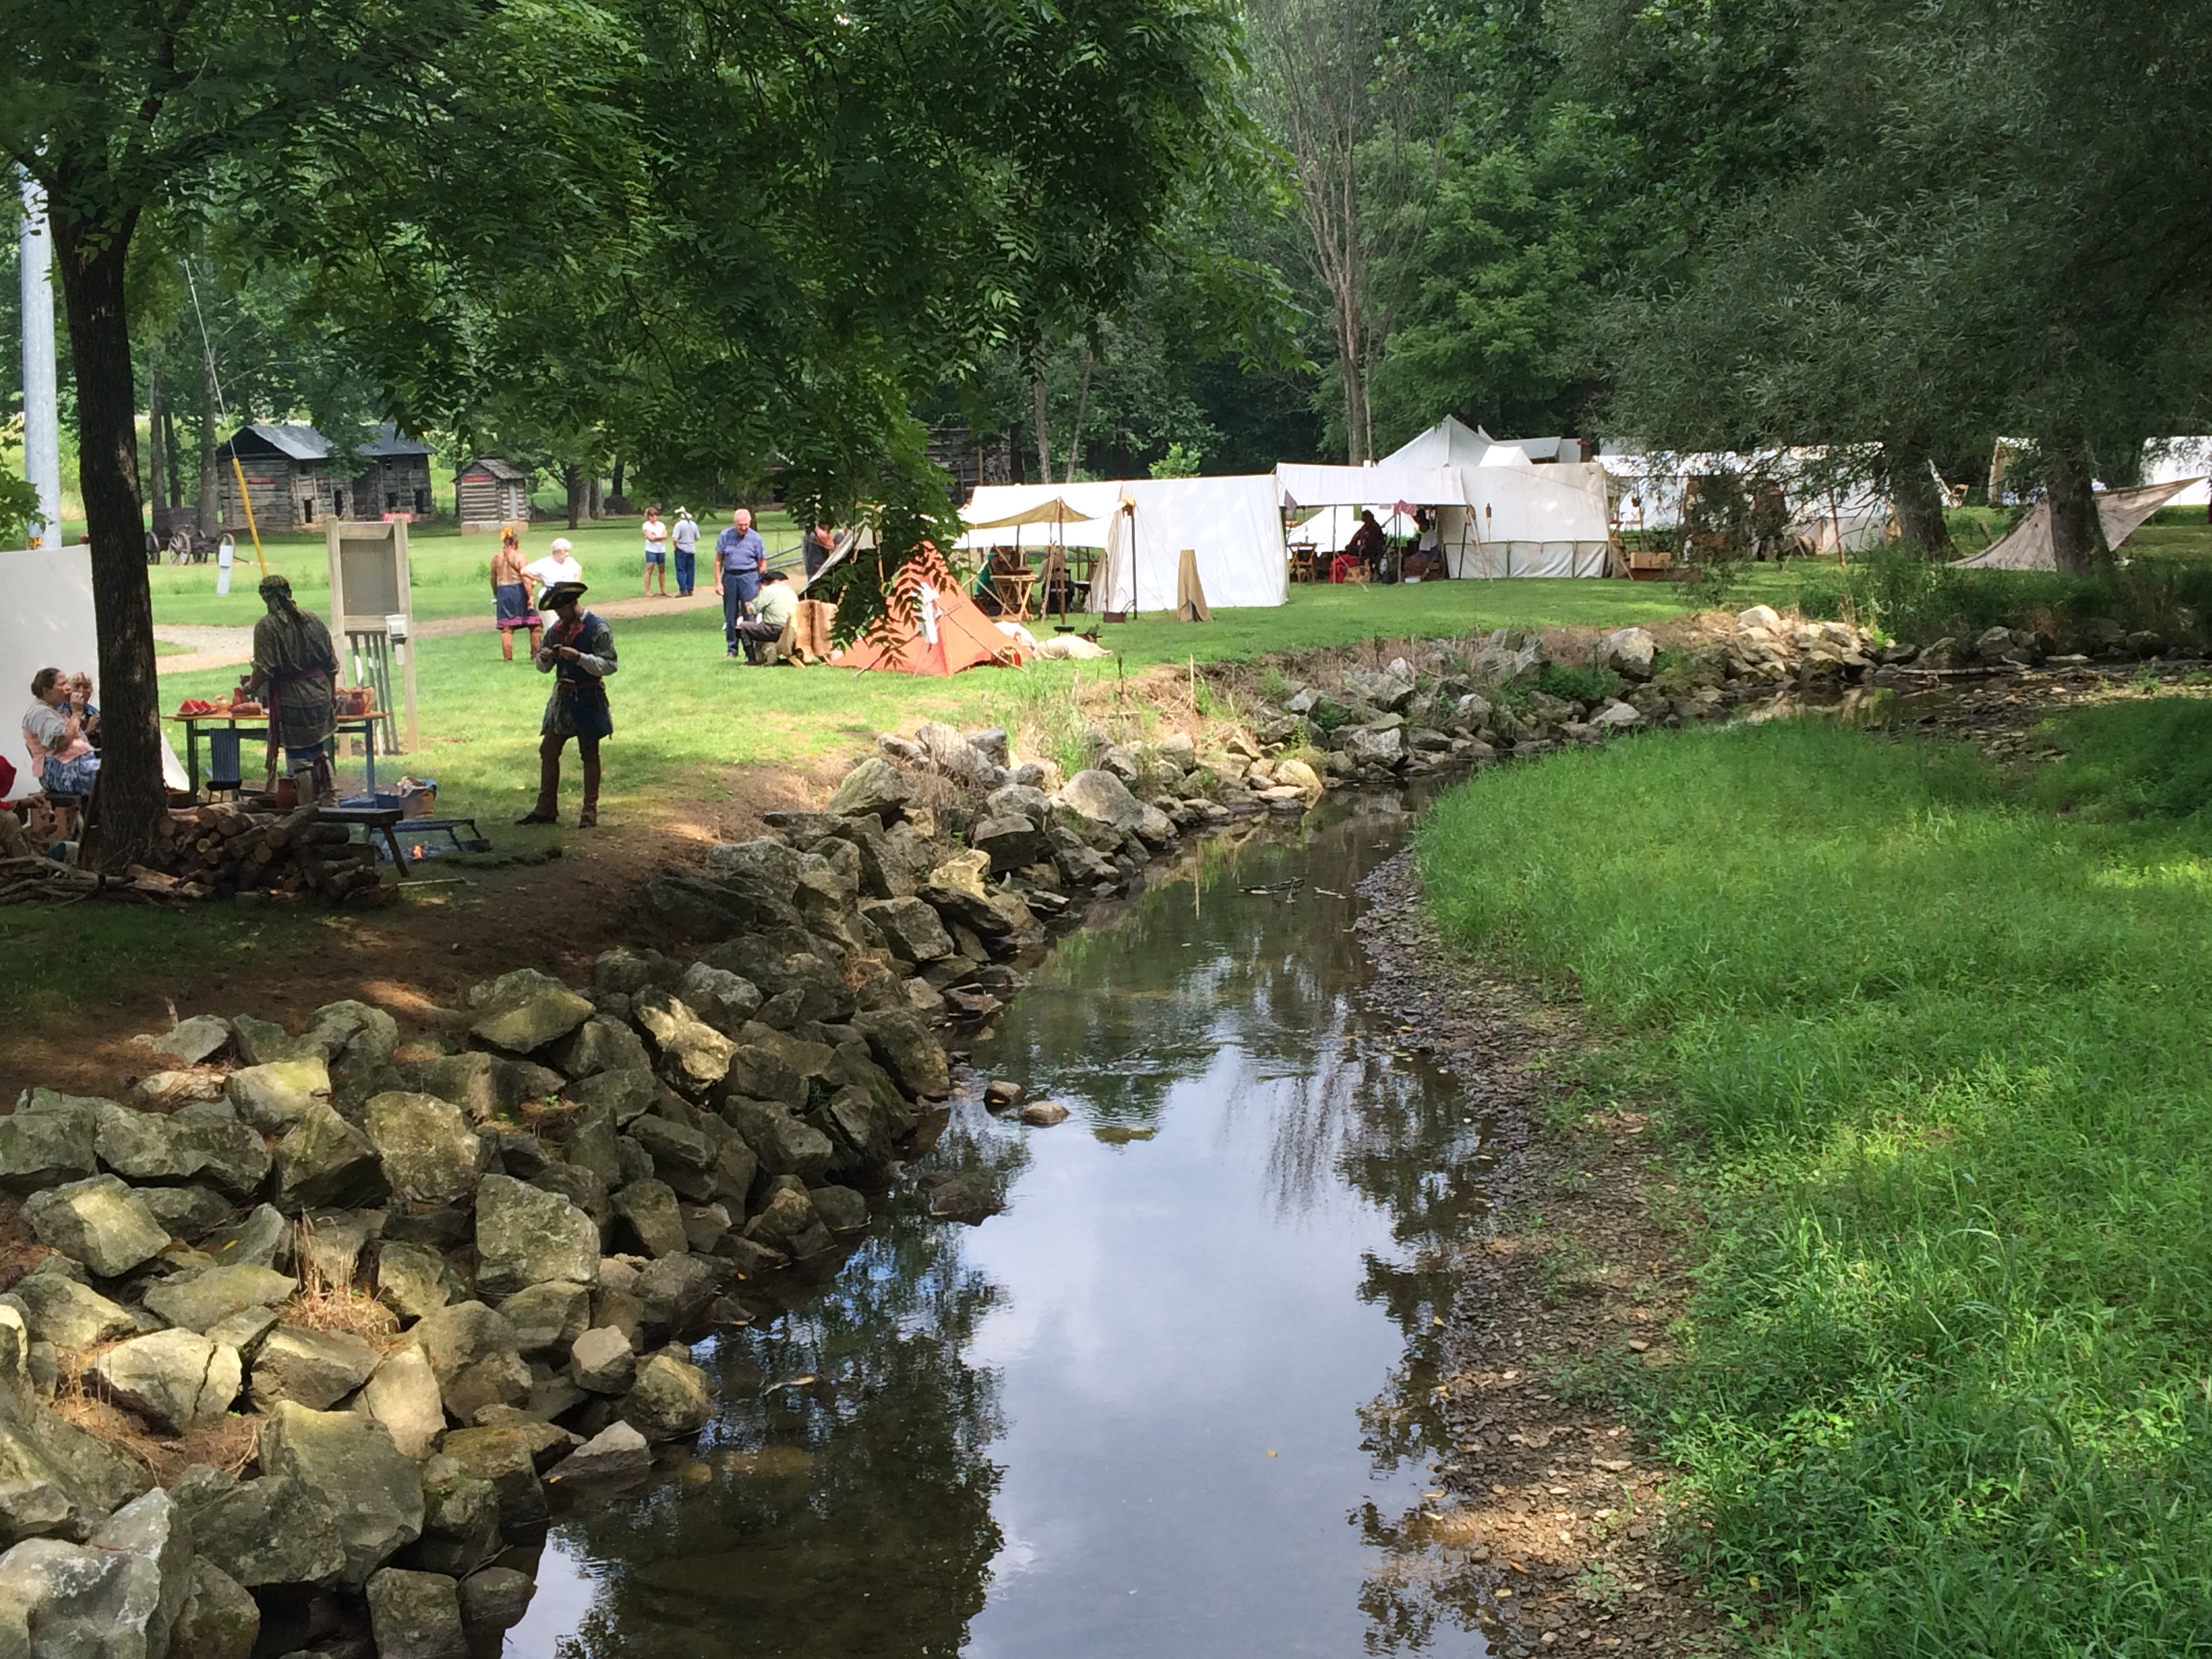 Tents, participants and visitors by the creek at the Grist Mill.